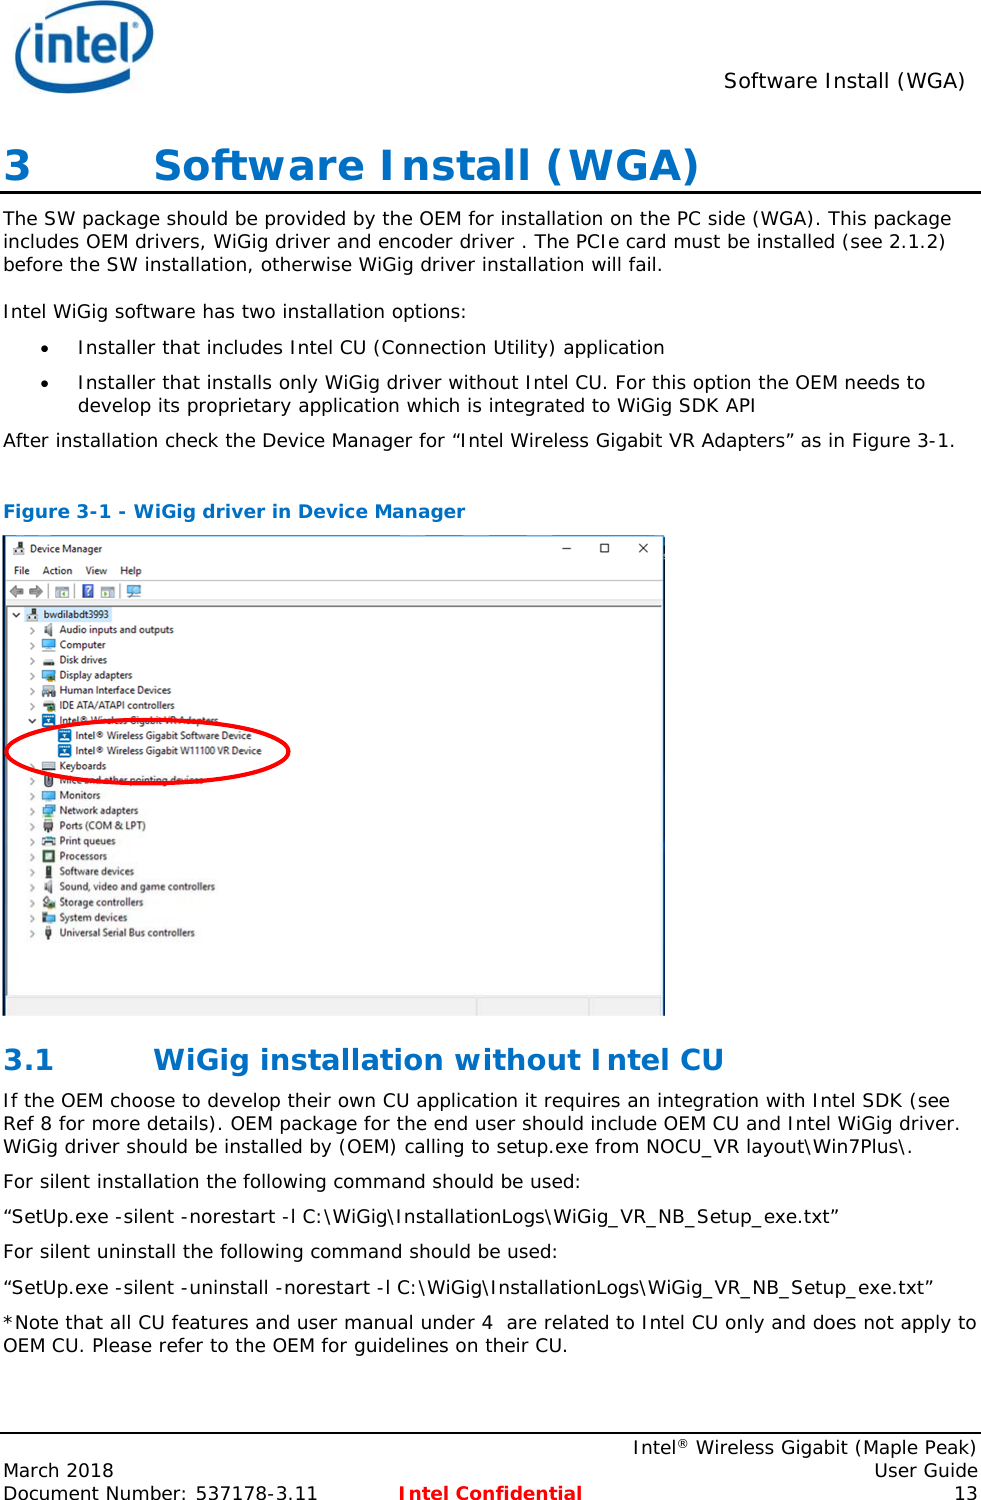  Software Install (WGA)    Intel® Wireless Gigabit (Maple Peak) March 2018    User Guide Document Number: 537178-3.11  Intel Confidential 13 3   Software Install (WGA) The SW package should be provided by the OEM for installation on the PC side (WGA). This package includes OEM drivers, WiGig driver and encoder driver . The PCIe card must be installed (see 2.1.2) before the SW installation, otherwise WiGig driver installation will fail. Intel WiGig software has two installation options:  Installer that includes Intel CU (Connection Utility) application  Installer that installs only WiGig driver without Intel CU. For this option the OEM needs to develop its proprietary application which is integrated to WiGig SDK API After installation check the Device Manager for “Intel Wireless Gigabit VR Adapters” as in Figure 3-1.  Figure 3-1 - WiGig driver in Device Manager  3.1 WiGig installation without Intel CU If the OEM choose to develop their own CU application it requires an integration with Intel SDK (see Ref 8 for more details). OEM package for the end user should include OEM CU and Intel WiGig driver. WiGig driver should be installed by (OEM) calling to setup.exe from NOCU_VR layout\Win7Plus\. For silent installation the following command should be used: “SetUp.exe -silent -norestart -l C:\WiGig\InstallationLogs\WiGig_VR_NB_Setup_exe.txt” For silent uninstall the following command should be used: “SetUp.exe -silent -uninstall -norestart -l C:\WiGig\InstallationLogs\WiGig_VR_NB_Setup_exe.txt” *Note that all CU features and user manual under 4  are related to Intel CU only and does not apply to OEM CU. Please refer to the OEM for guidelines on their CU. 